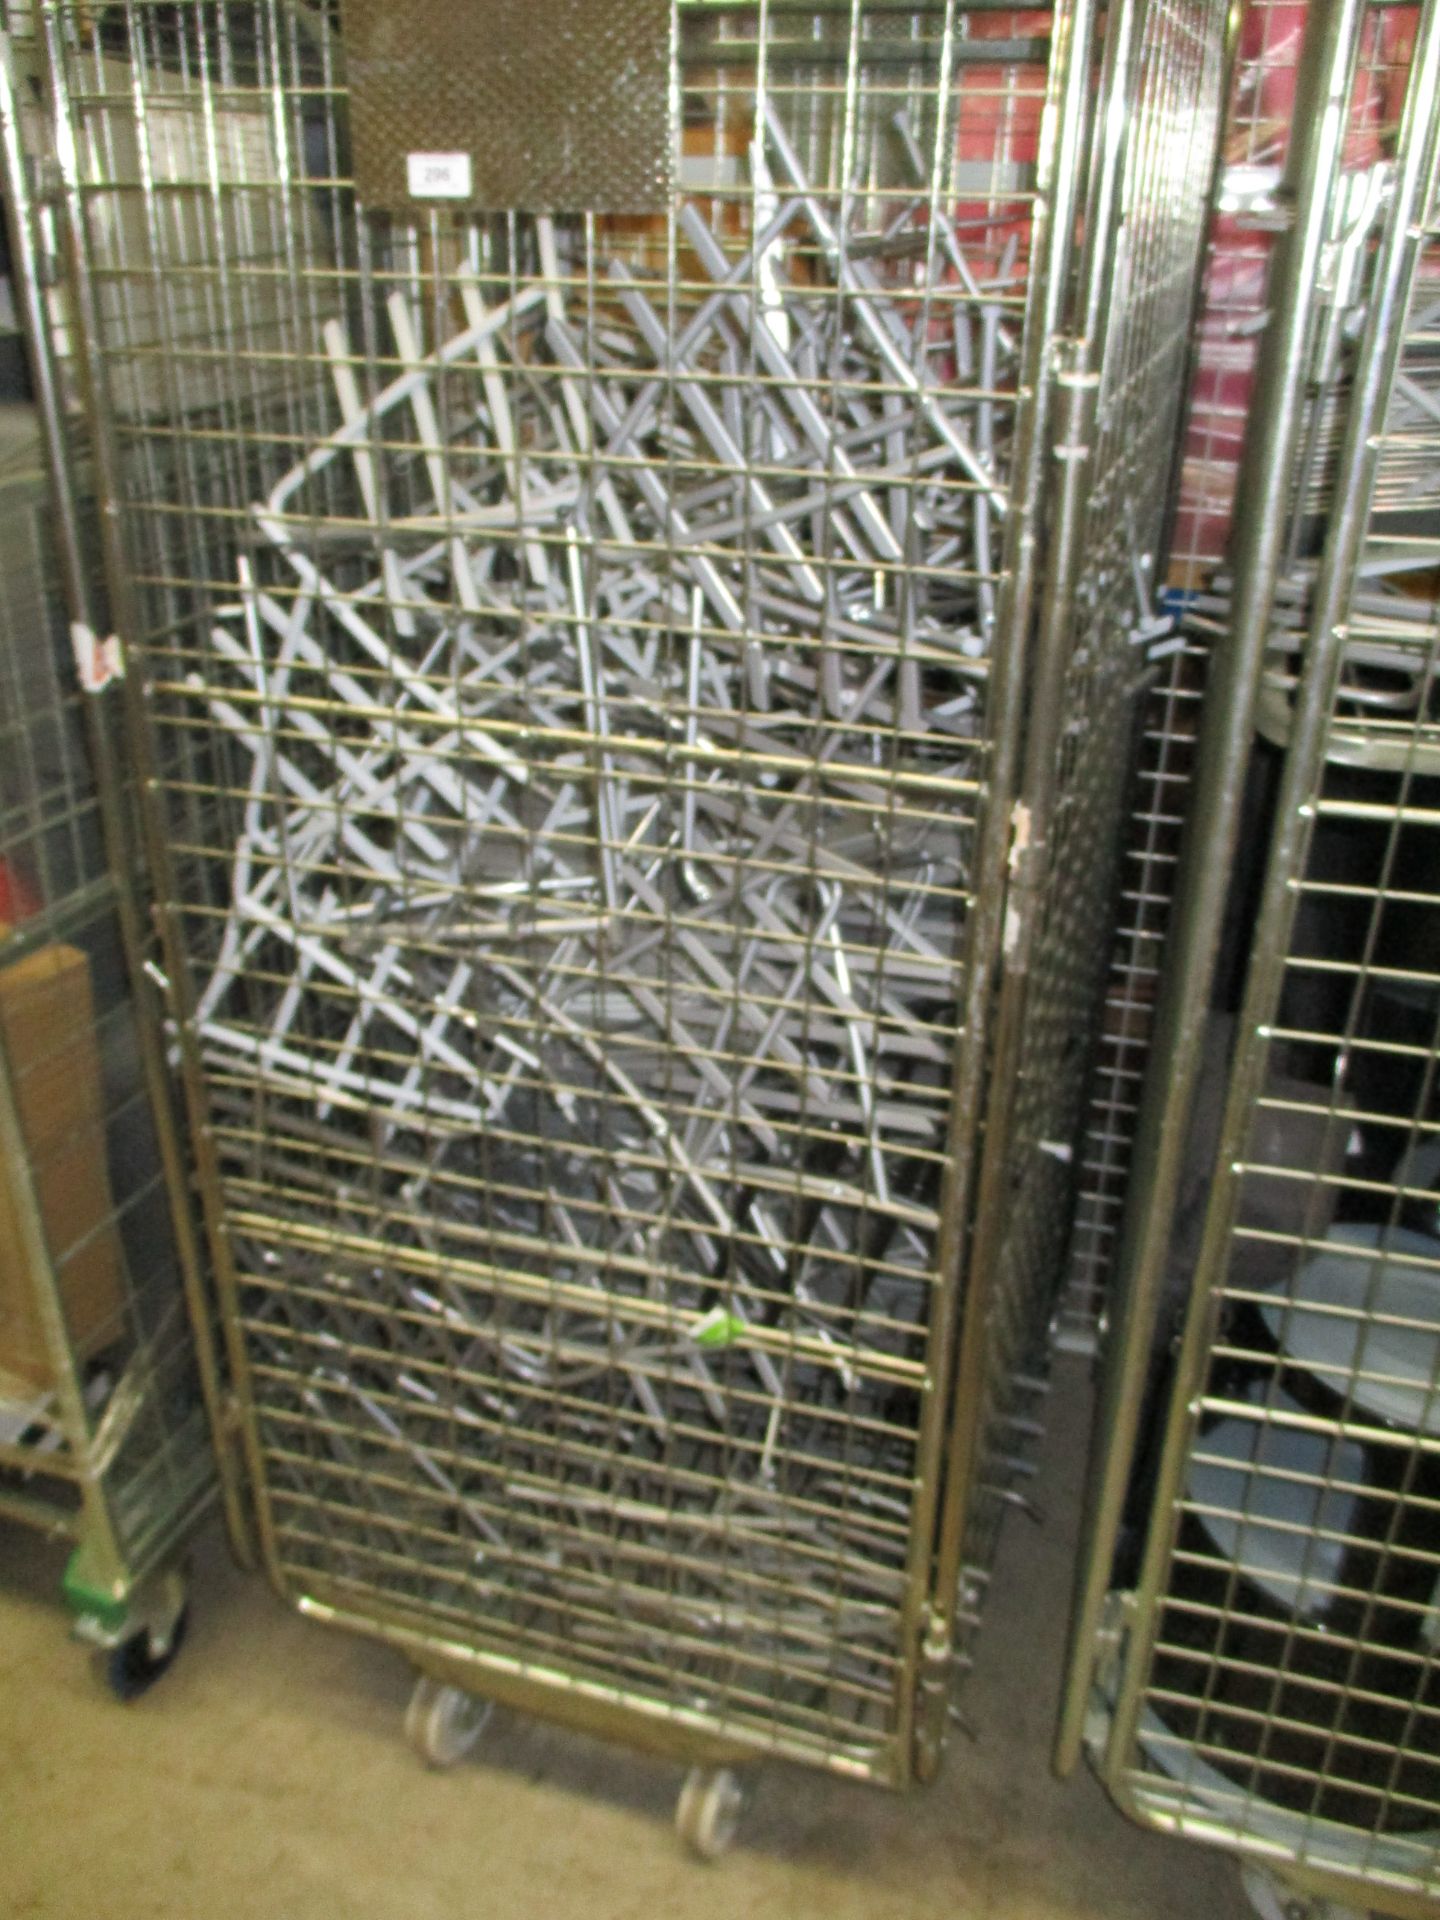 Contents to cage - large quantity of grey metal filing trays (please note - cage is not included